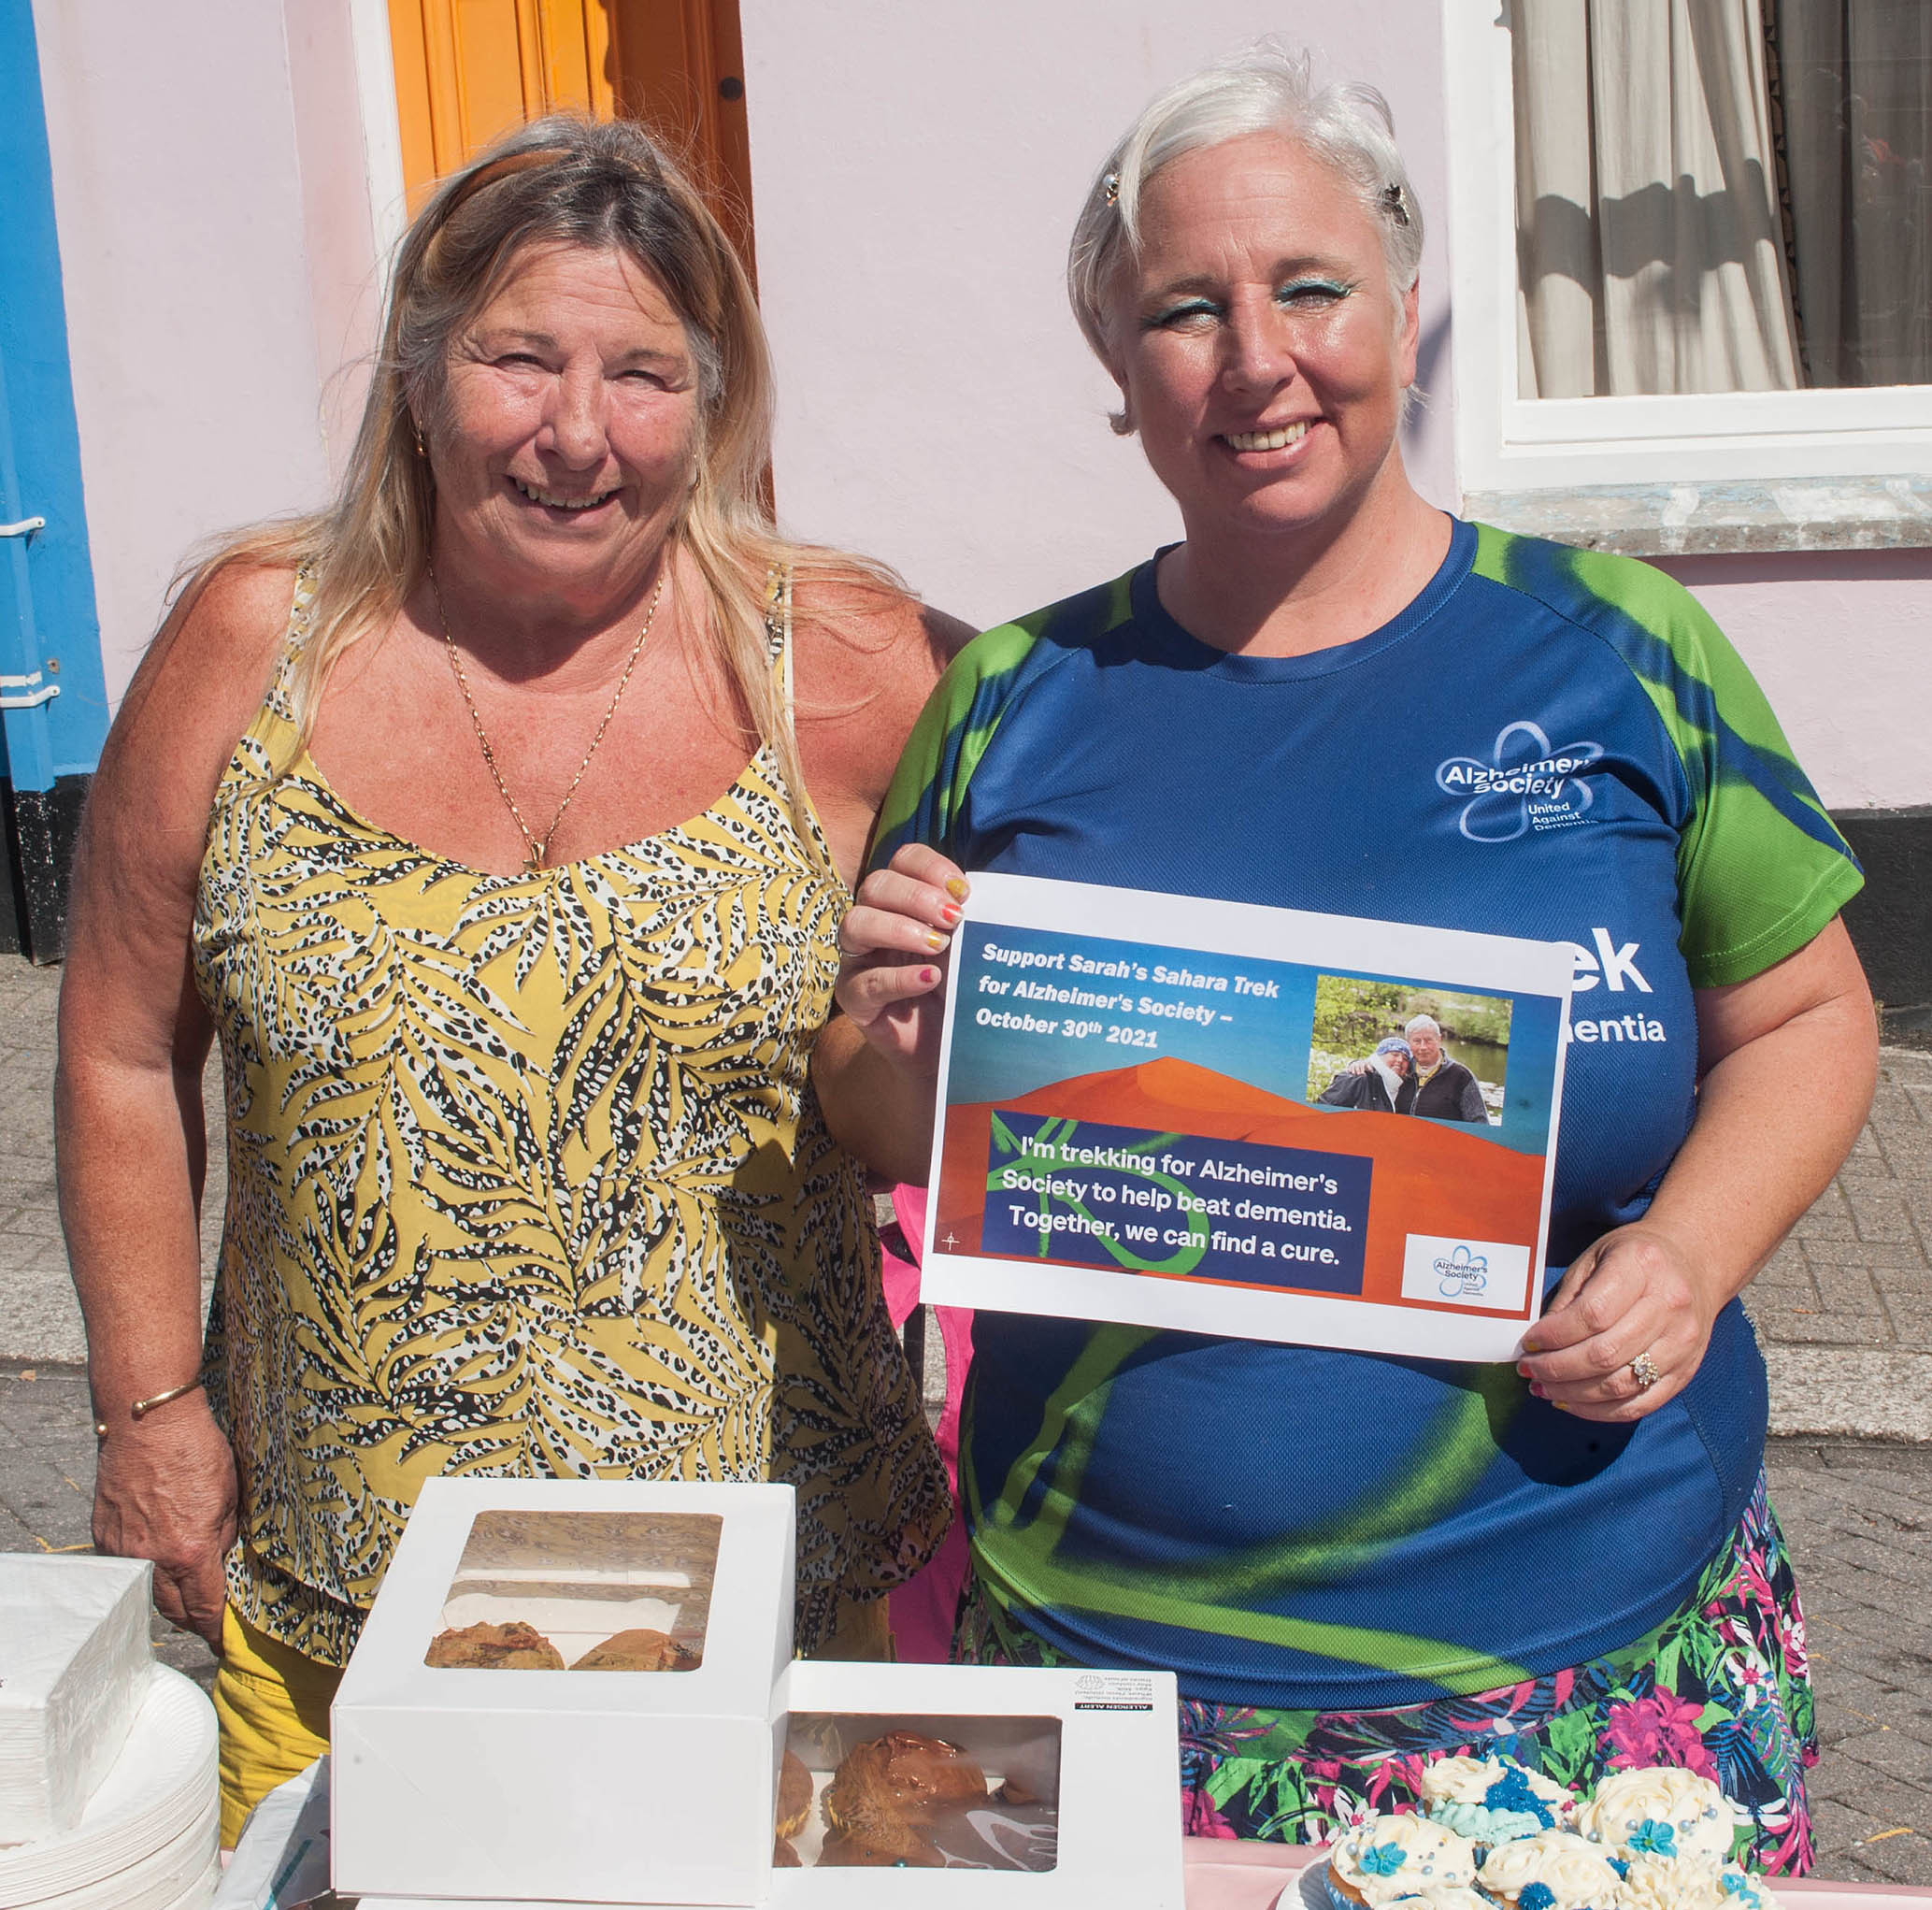 Teri Ann Pellow (left) and Sarah King on the Alzheimers Society stall. Sarah from Mylor Bridge, is looking to raise money for the Alzheimers Society by walking across the Sahara Desert in a tribute to her dad who has early on-set Alzheimers. Picture by